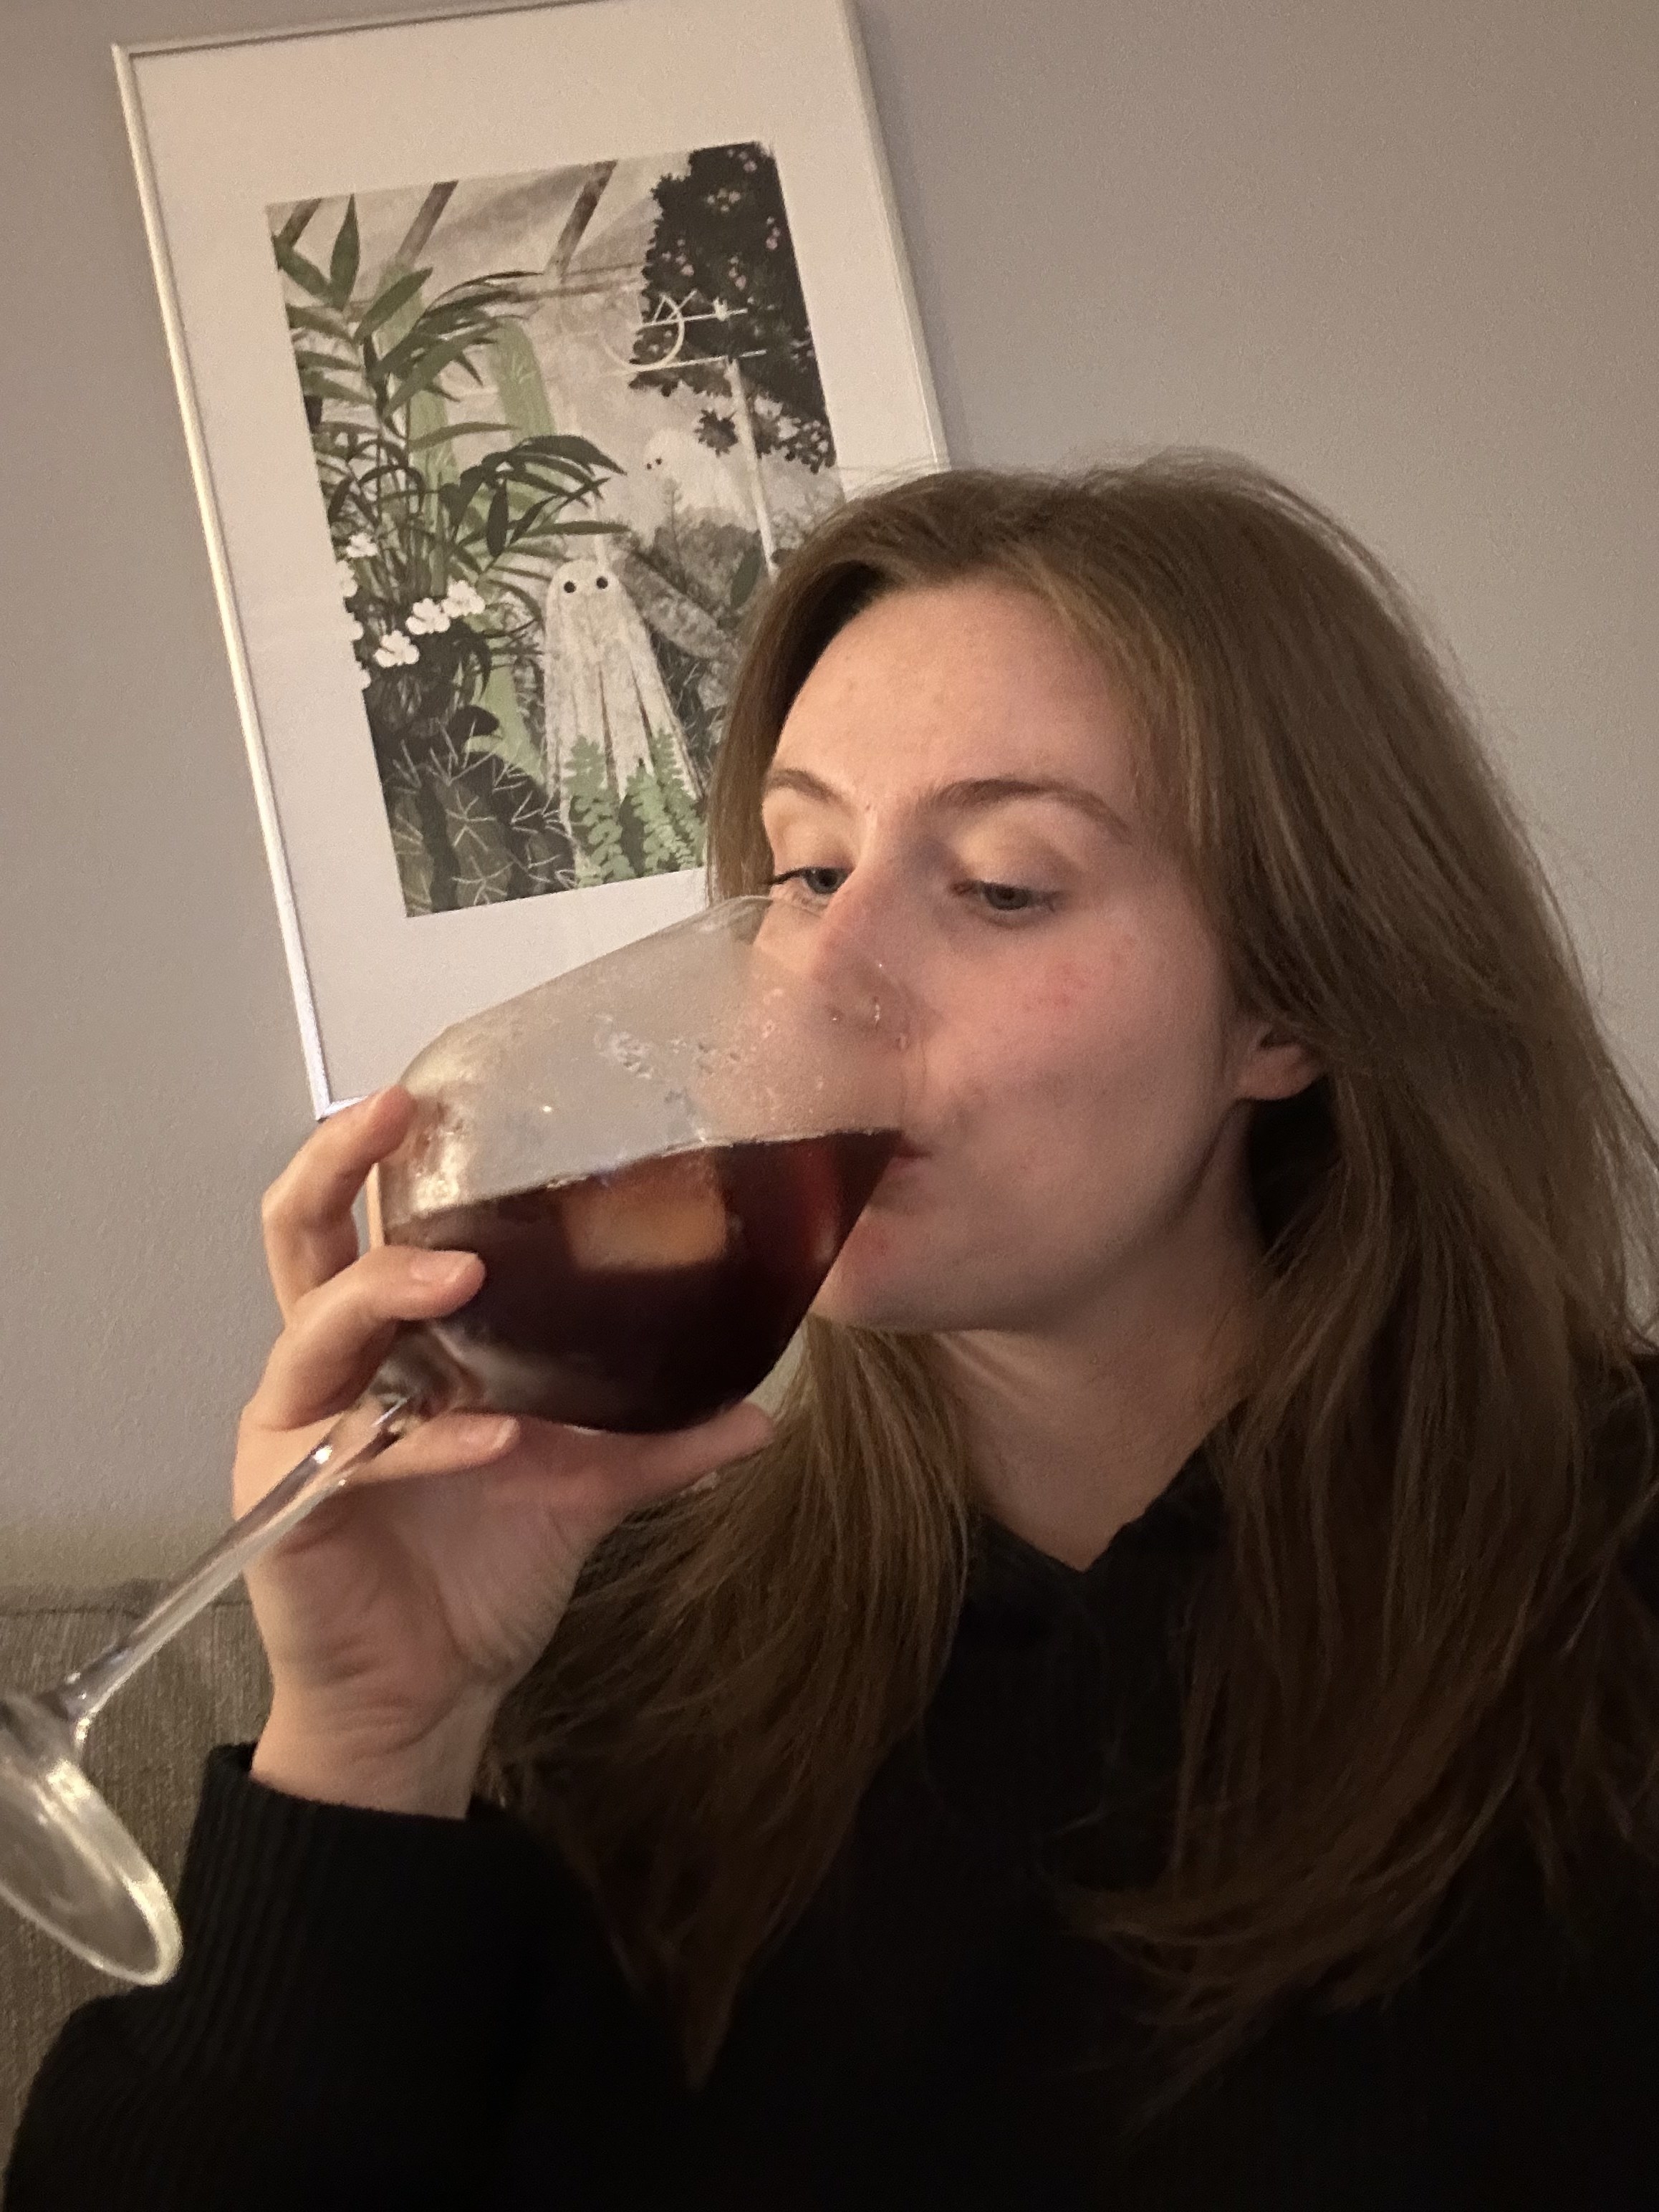 author drinking from the glass